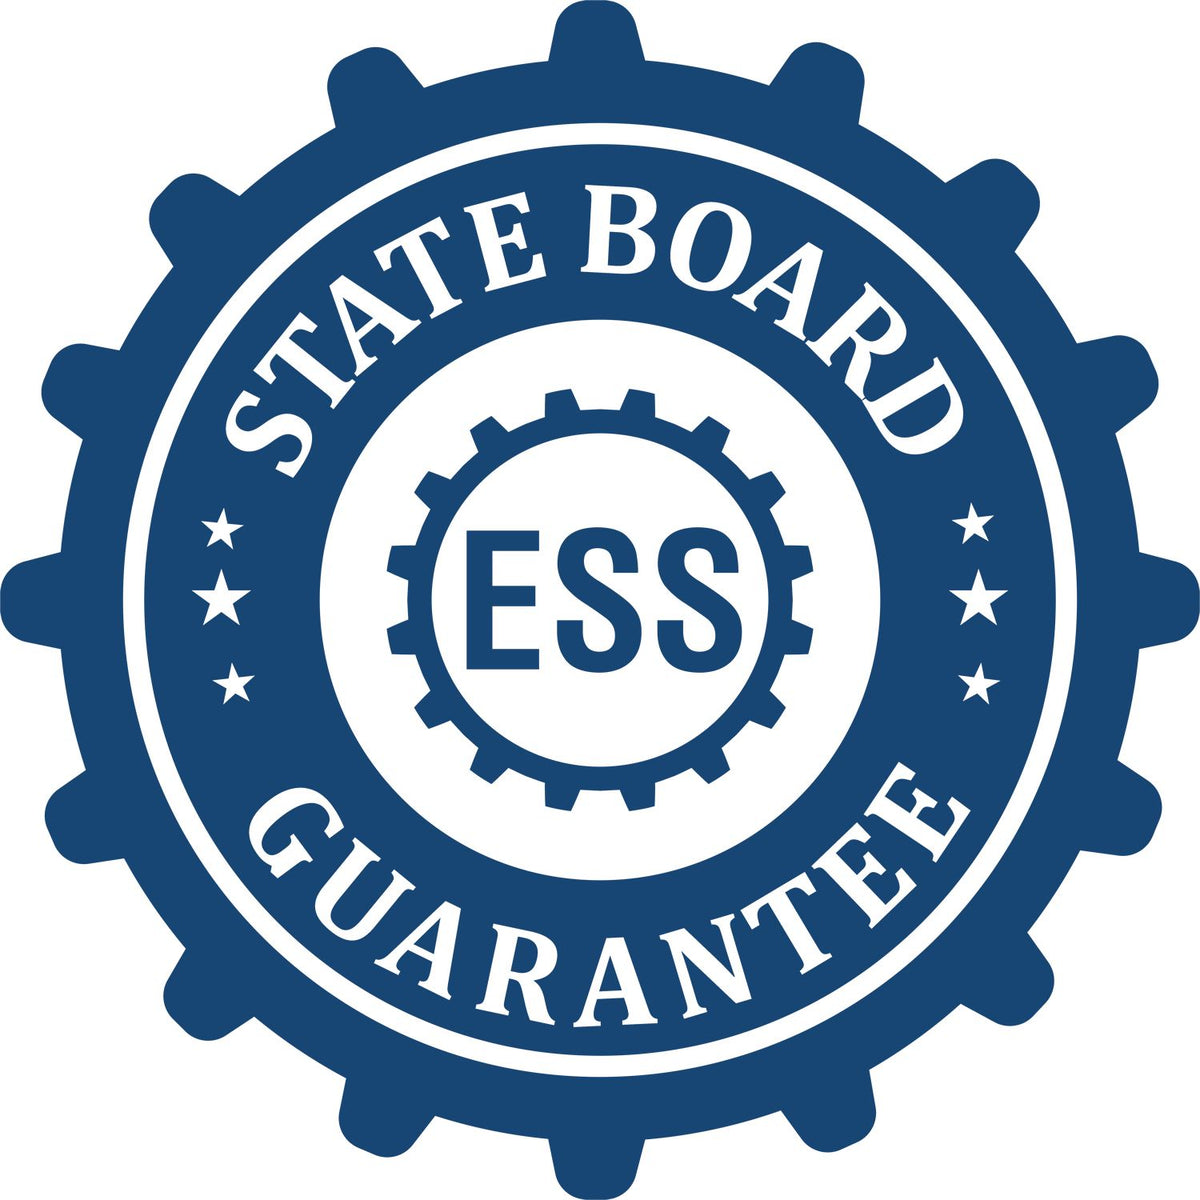 An emblem in a gear shape illustrating a state board guarantee for the Digital Michigan PE Stamp and Electronic Seal for Michigan Engineer product.